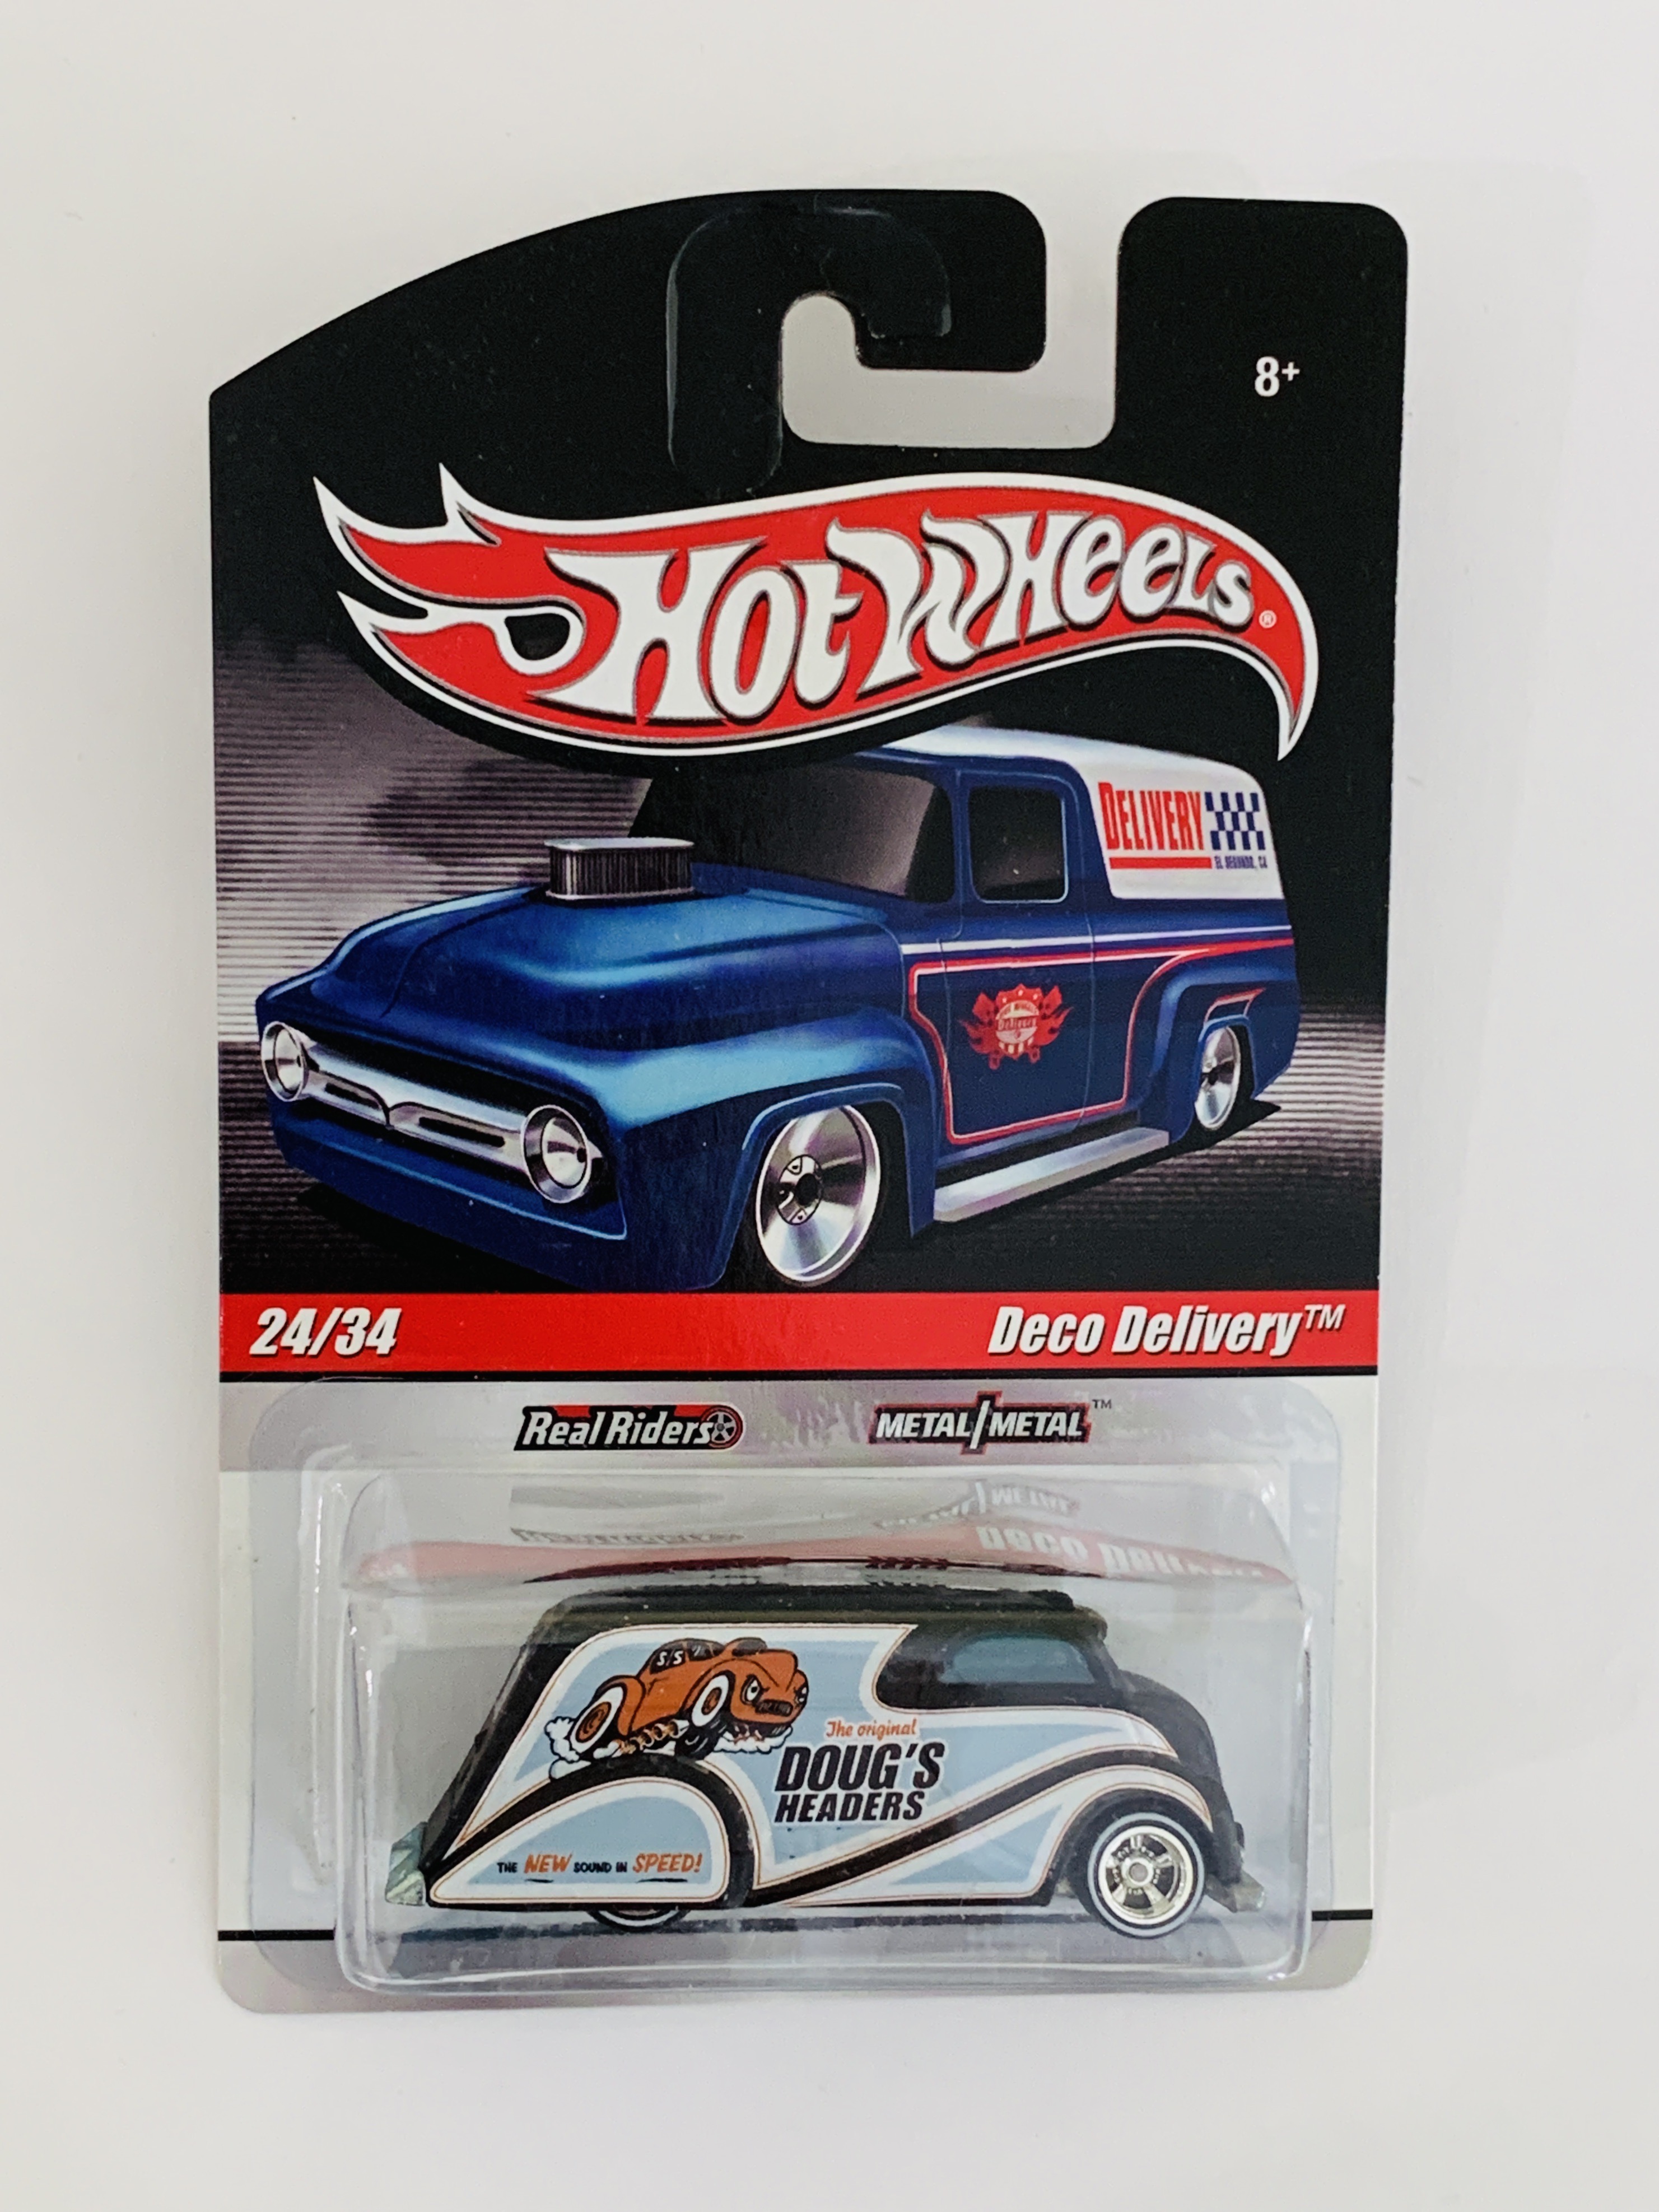 Hot Wheels Slick Rides Delivery Deco Delivery